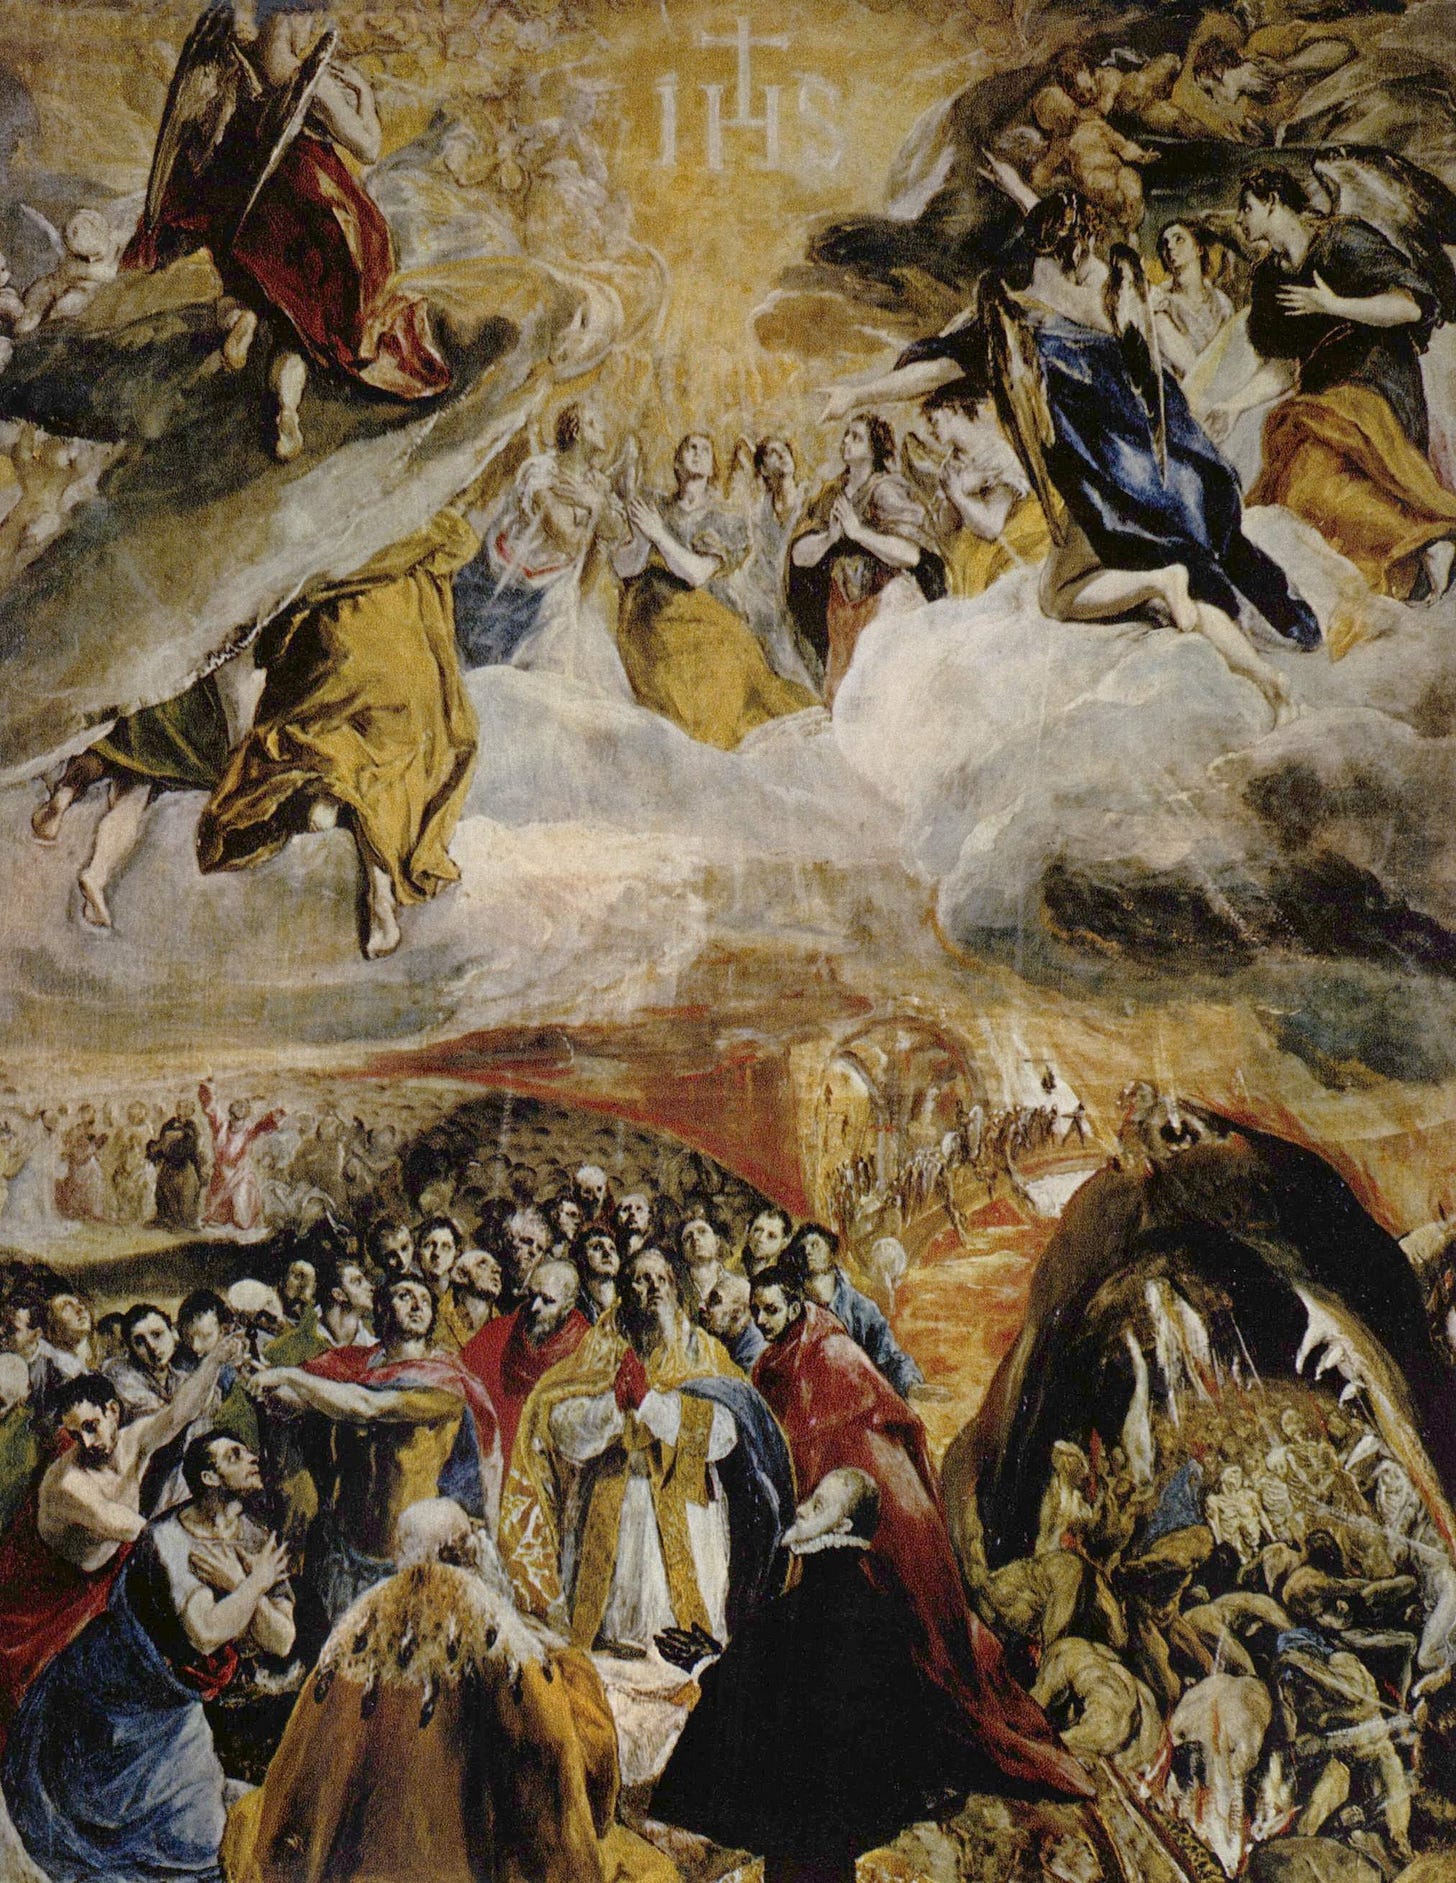 Painting by El Greco